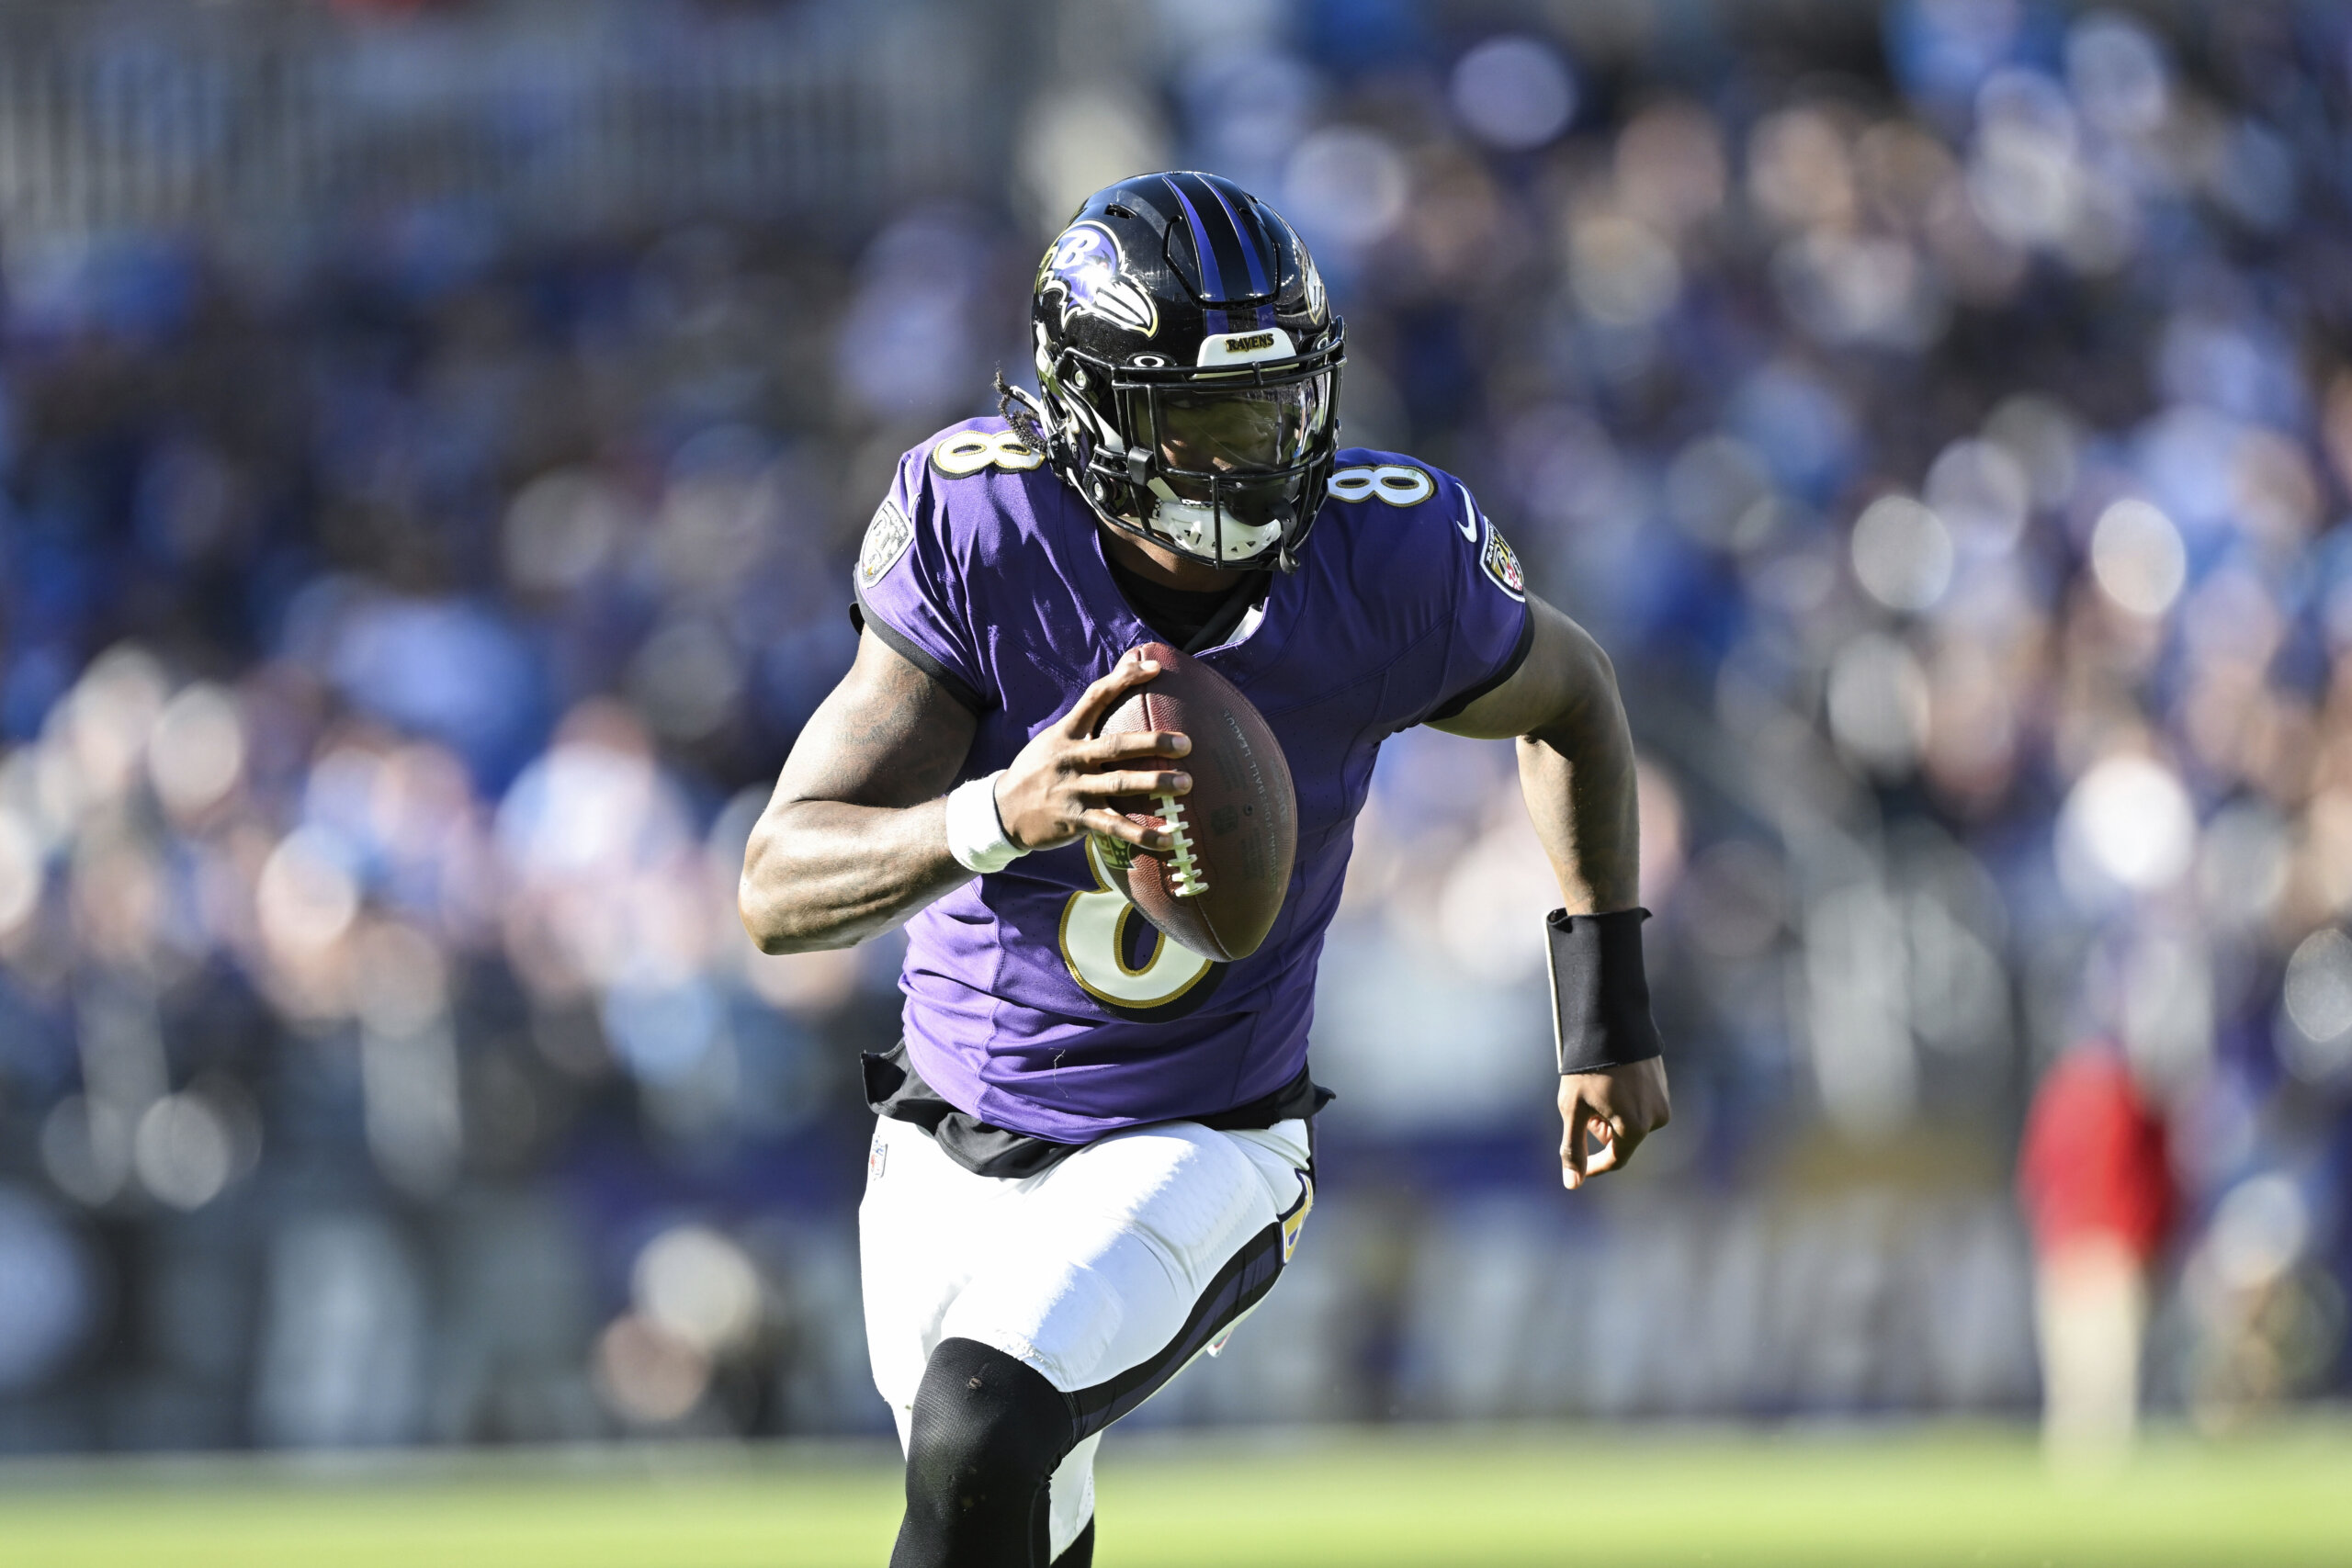 Now one win from a Super Bowl, the Ravens face a big hurdle in